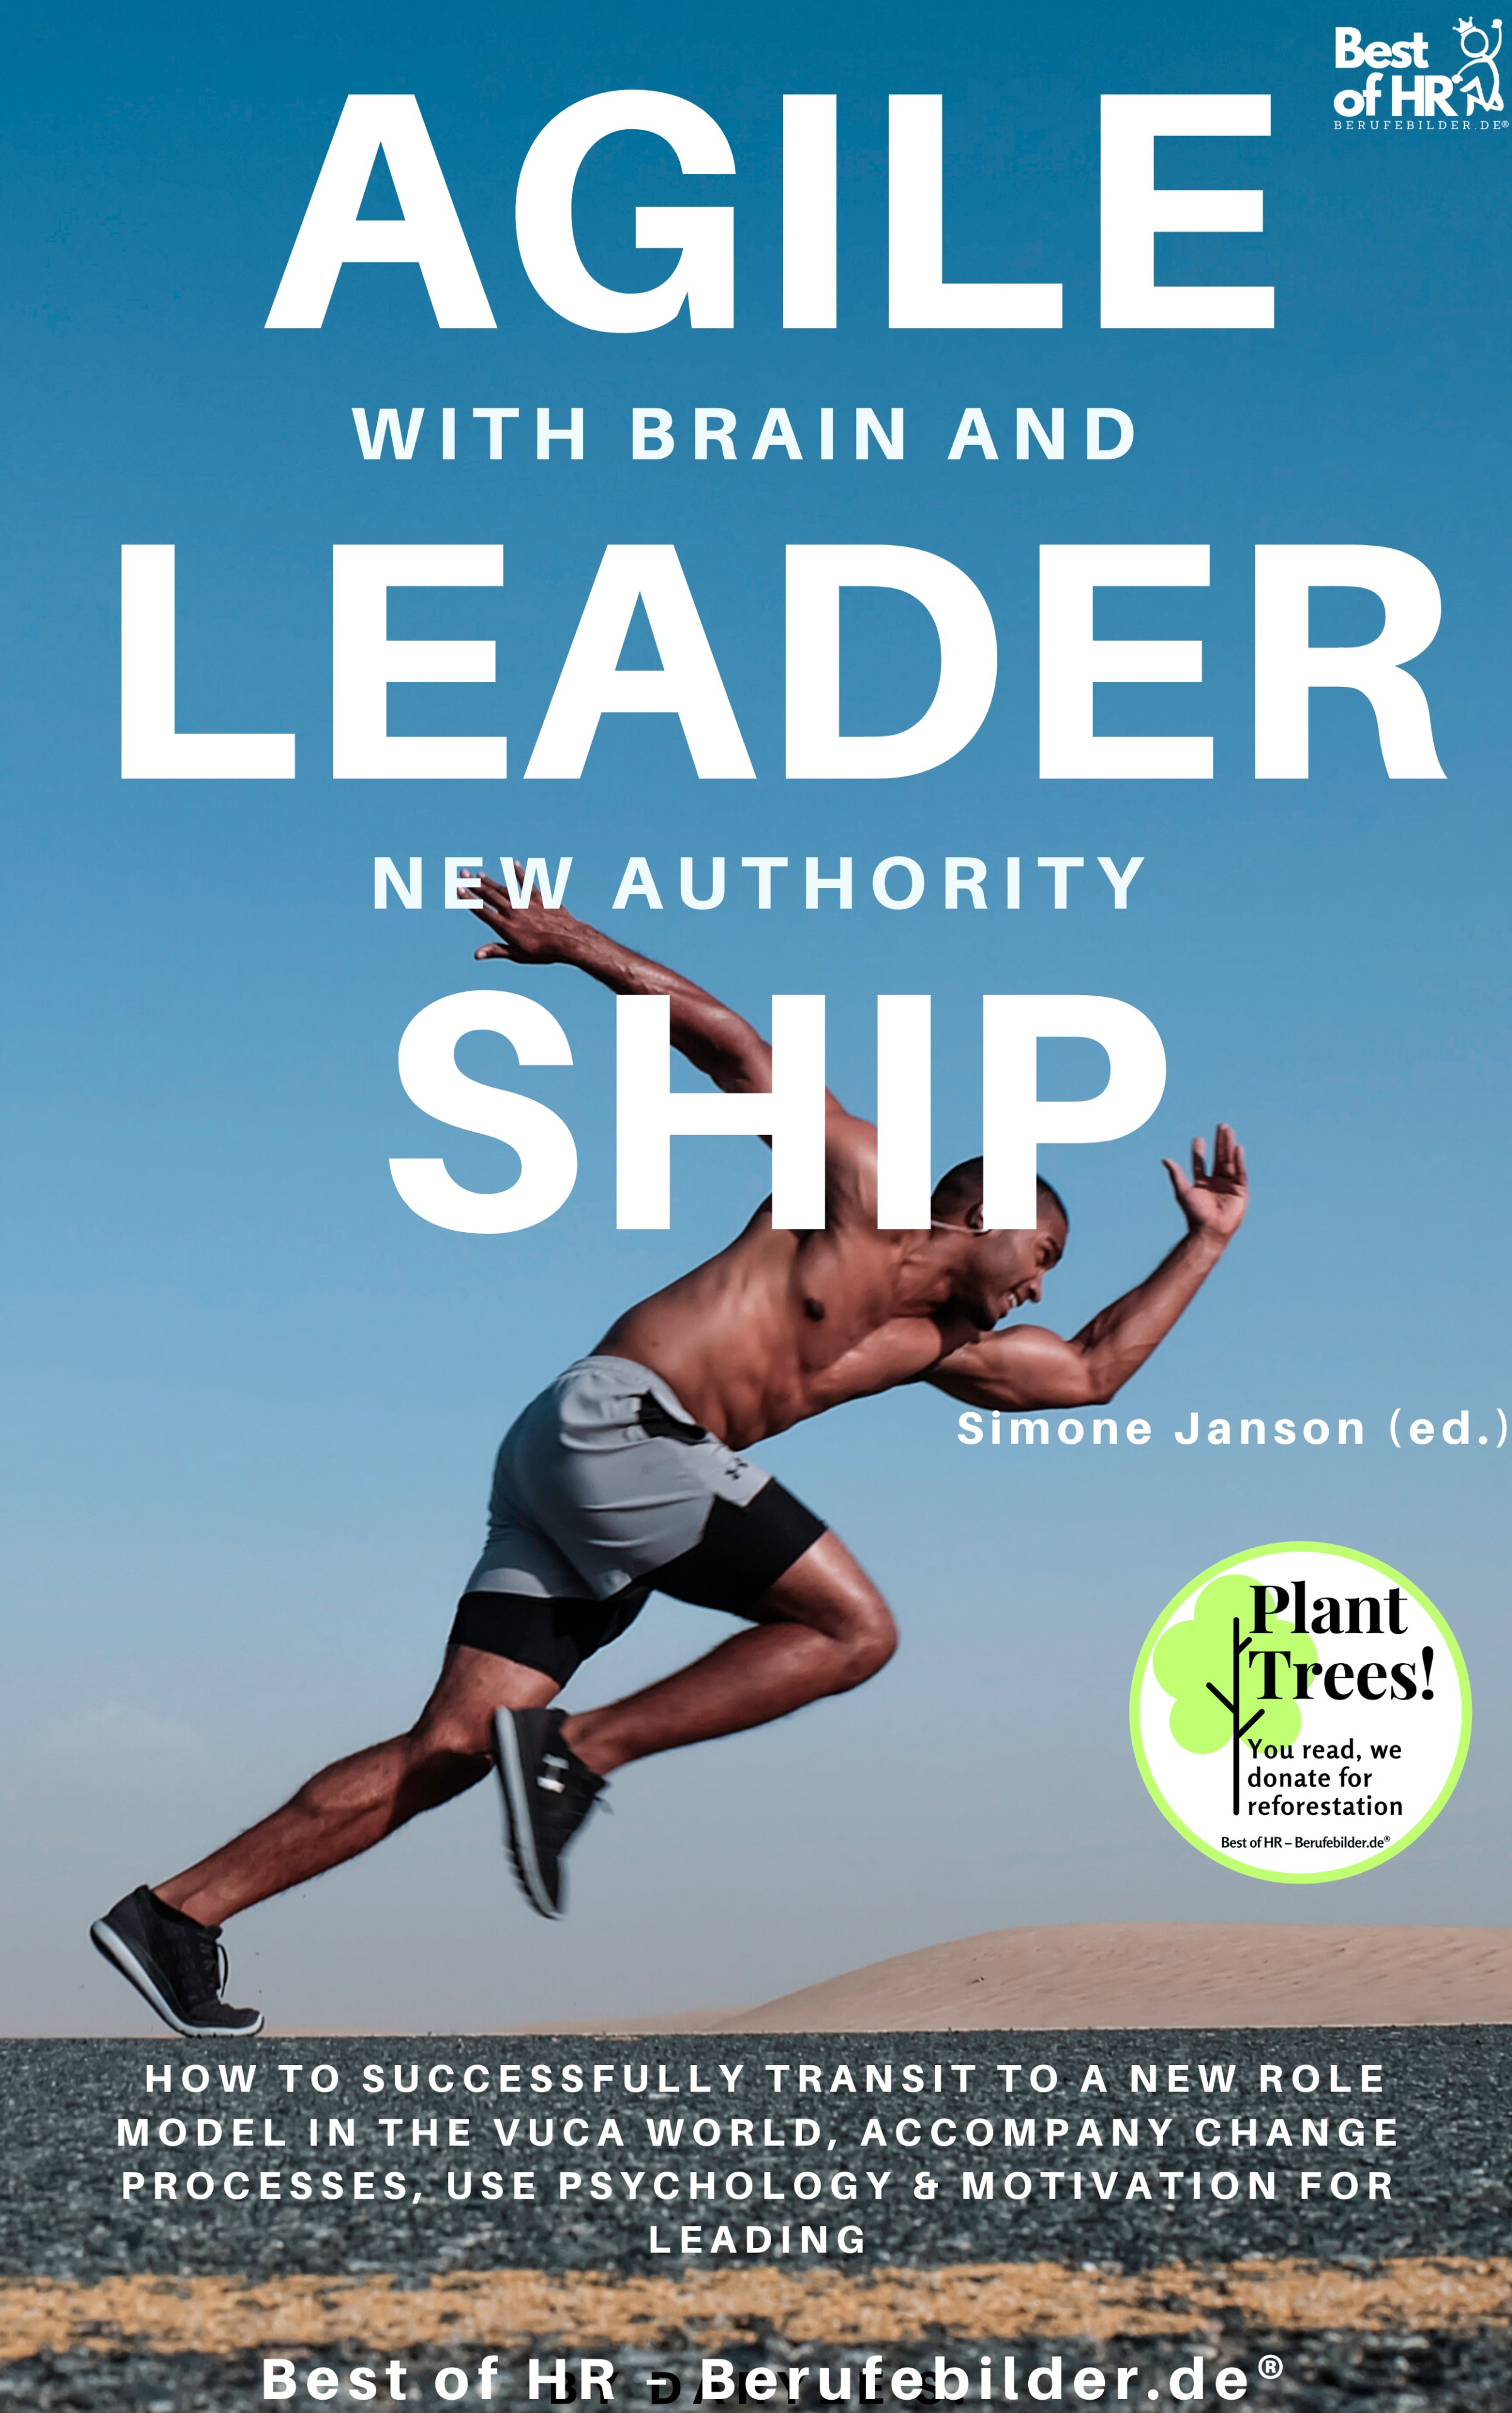 Agile Leadership with Brain and New Authority